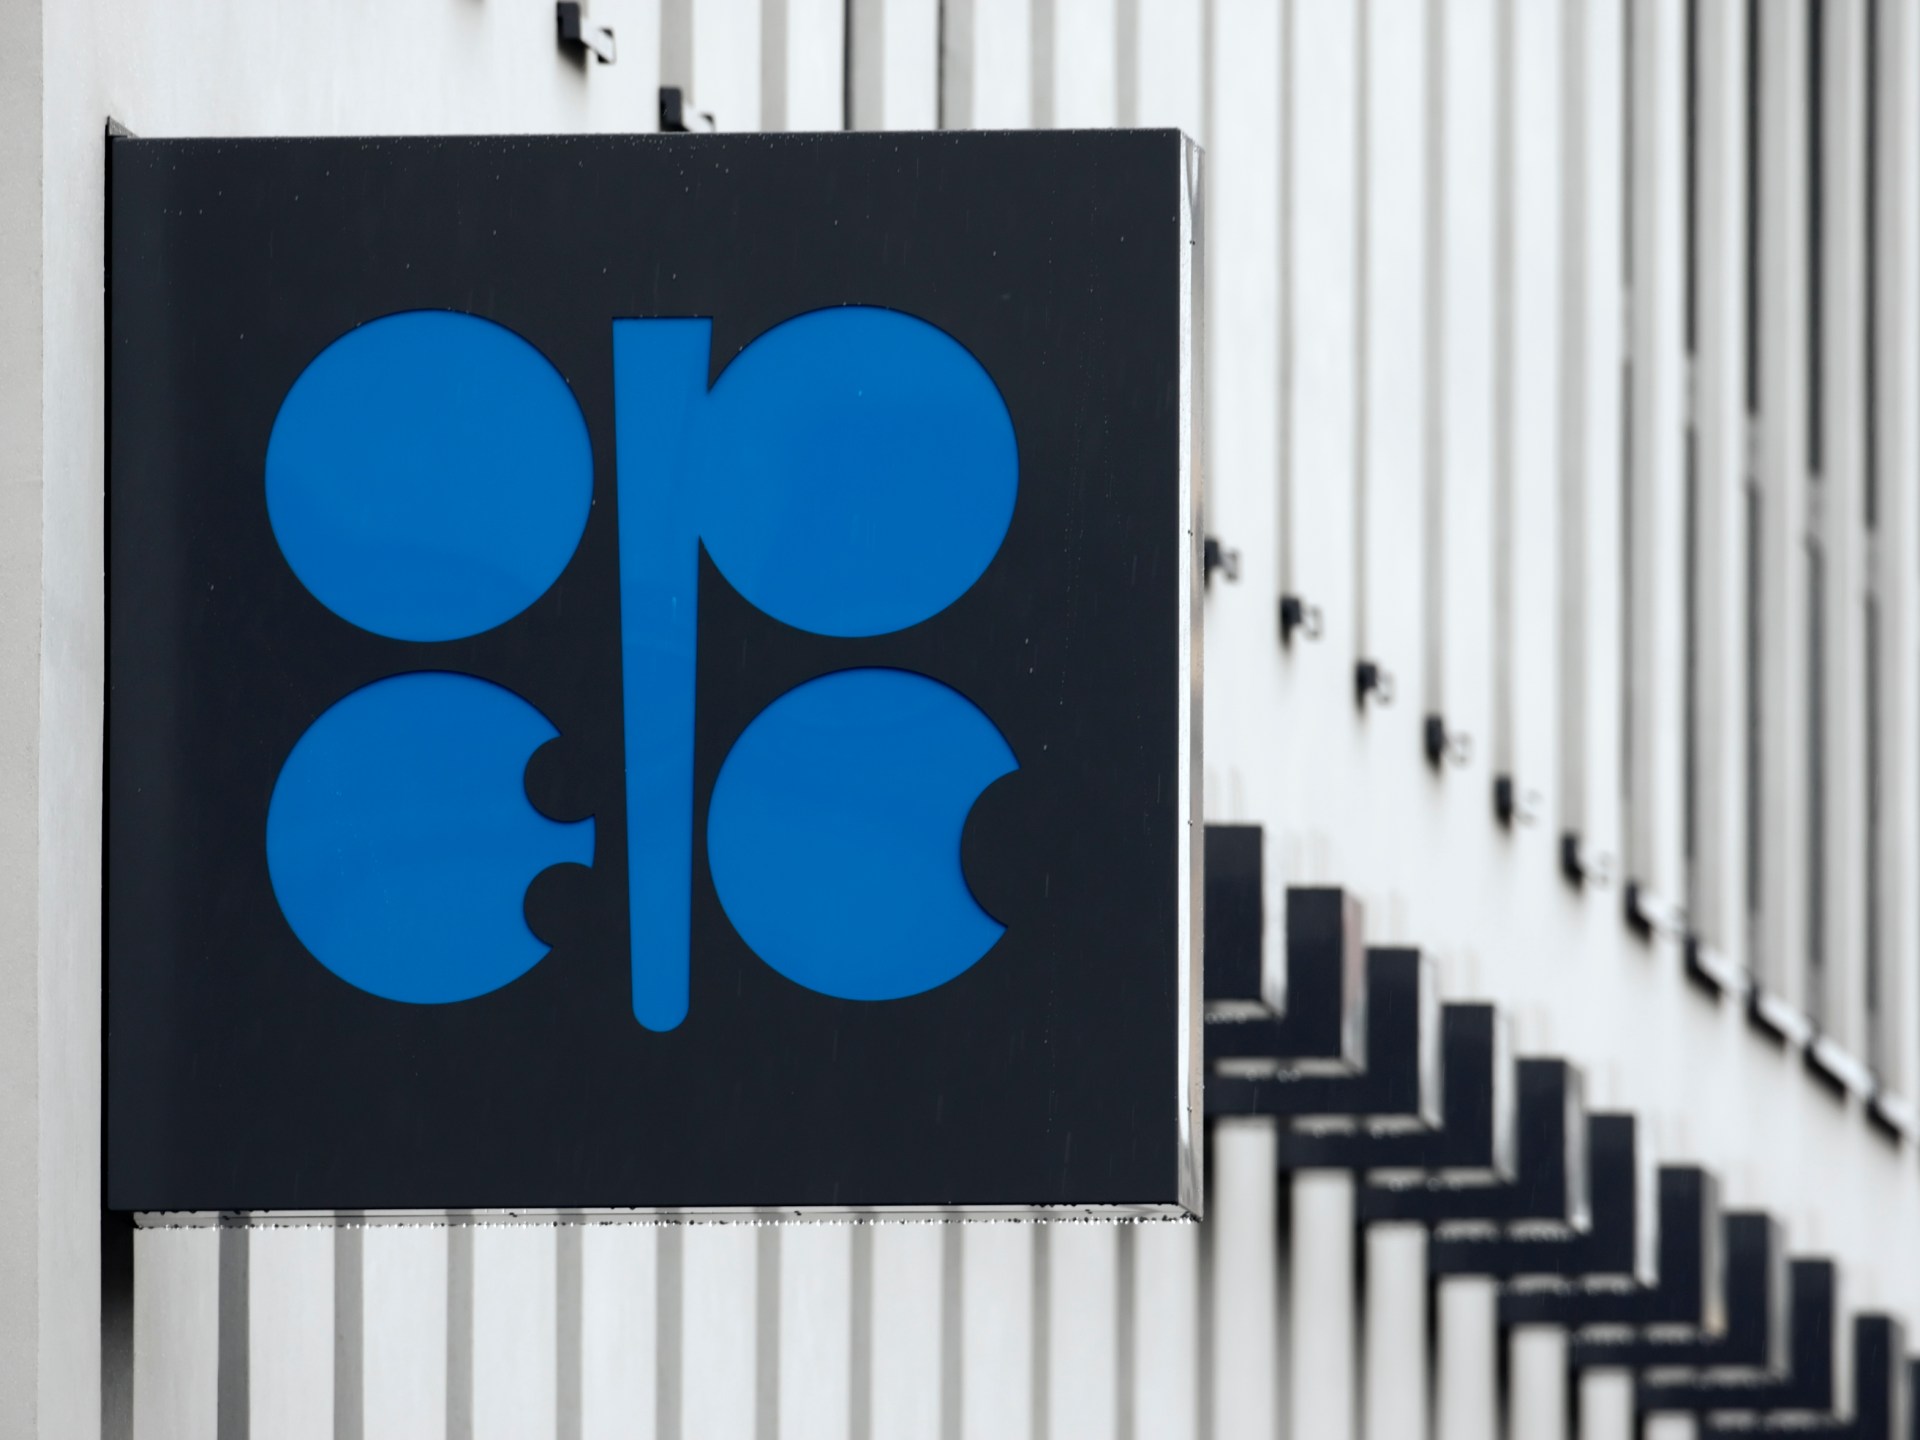 ‘OPEC does not control the price’: OPEC President